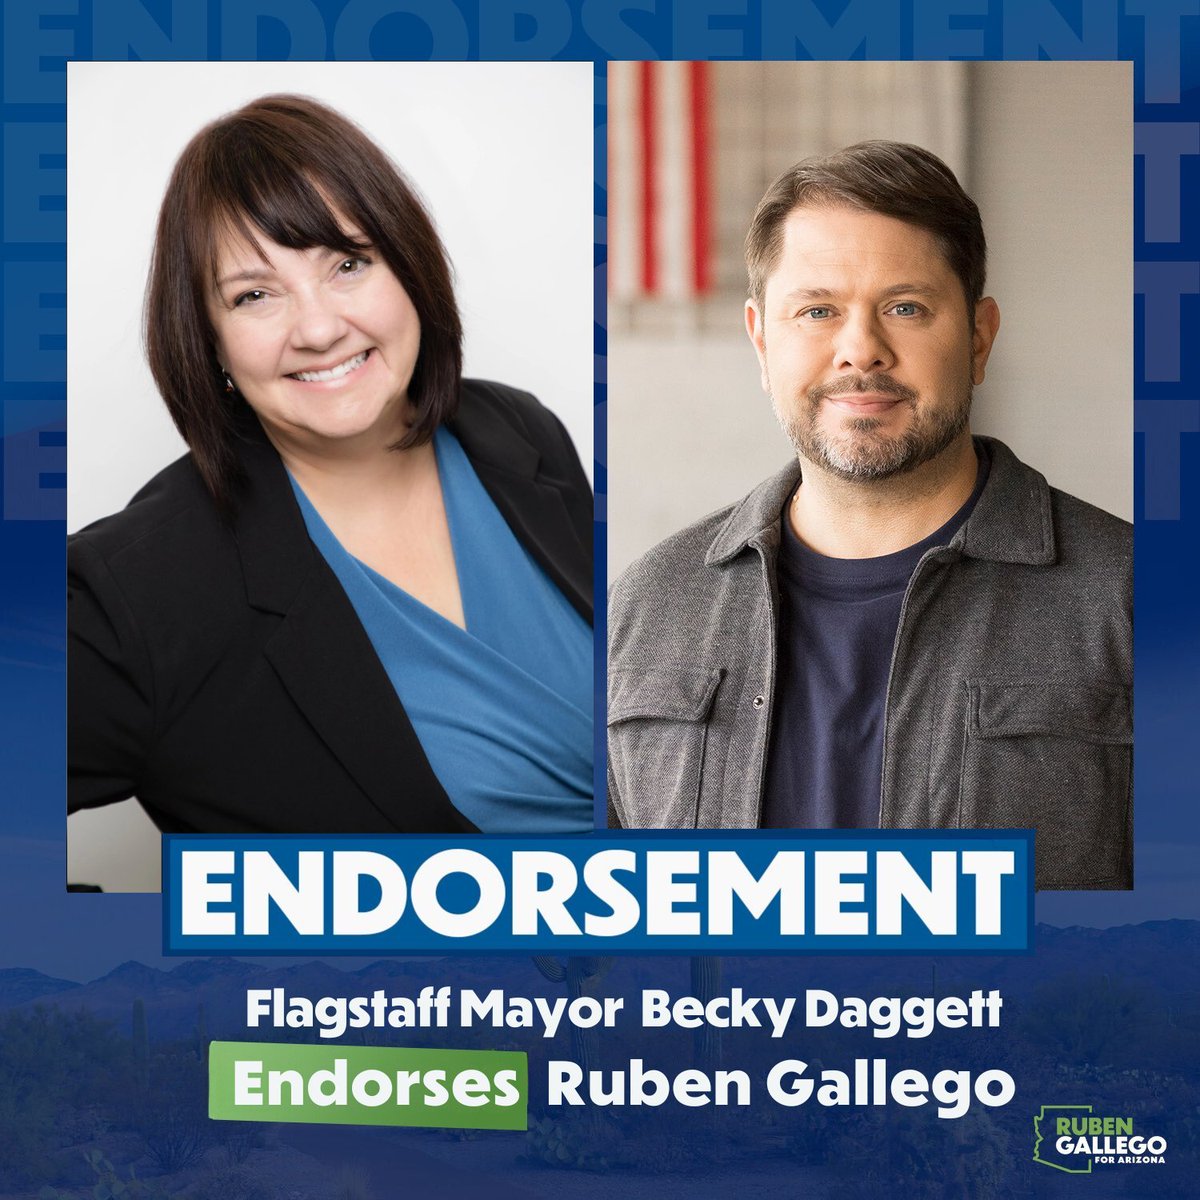 Proud to have Mayor Becky Daggett on Team Gallego! Throughout her time as Mayor, we’ve worked closely on infrastructure projects and ways to combat flooding and wildfires. I’m looking forward to continuing our partnership as Arizona’s next U.S. Senator.